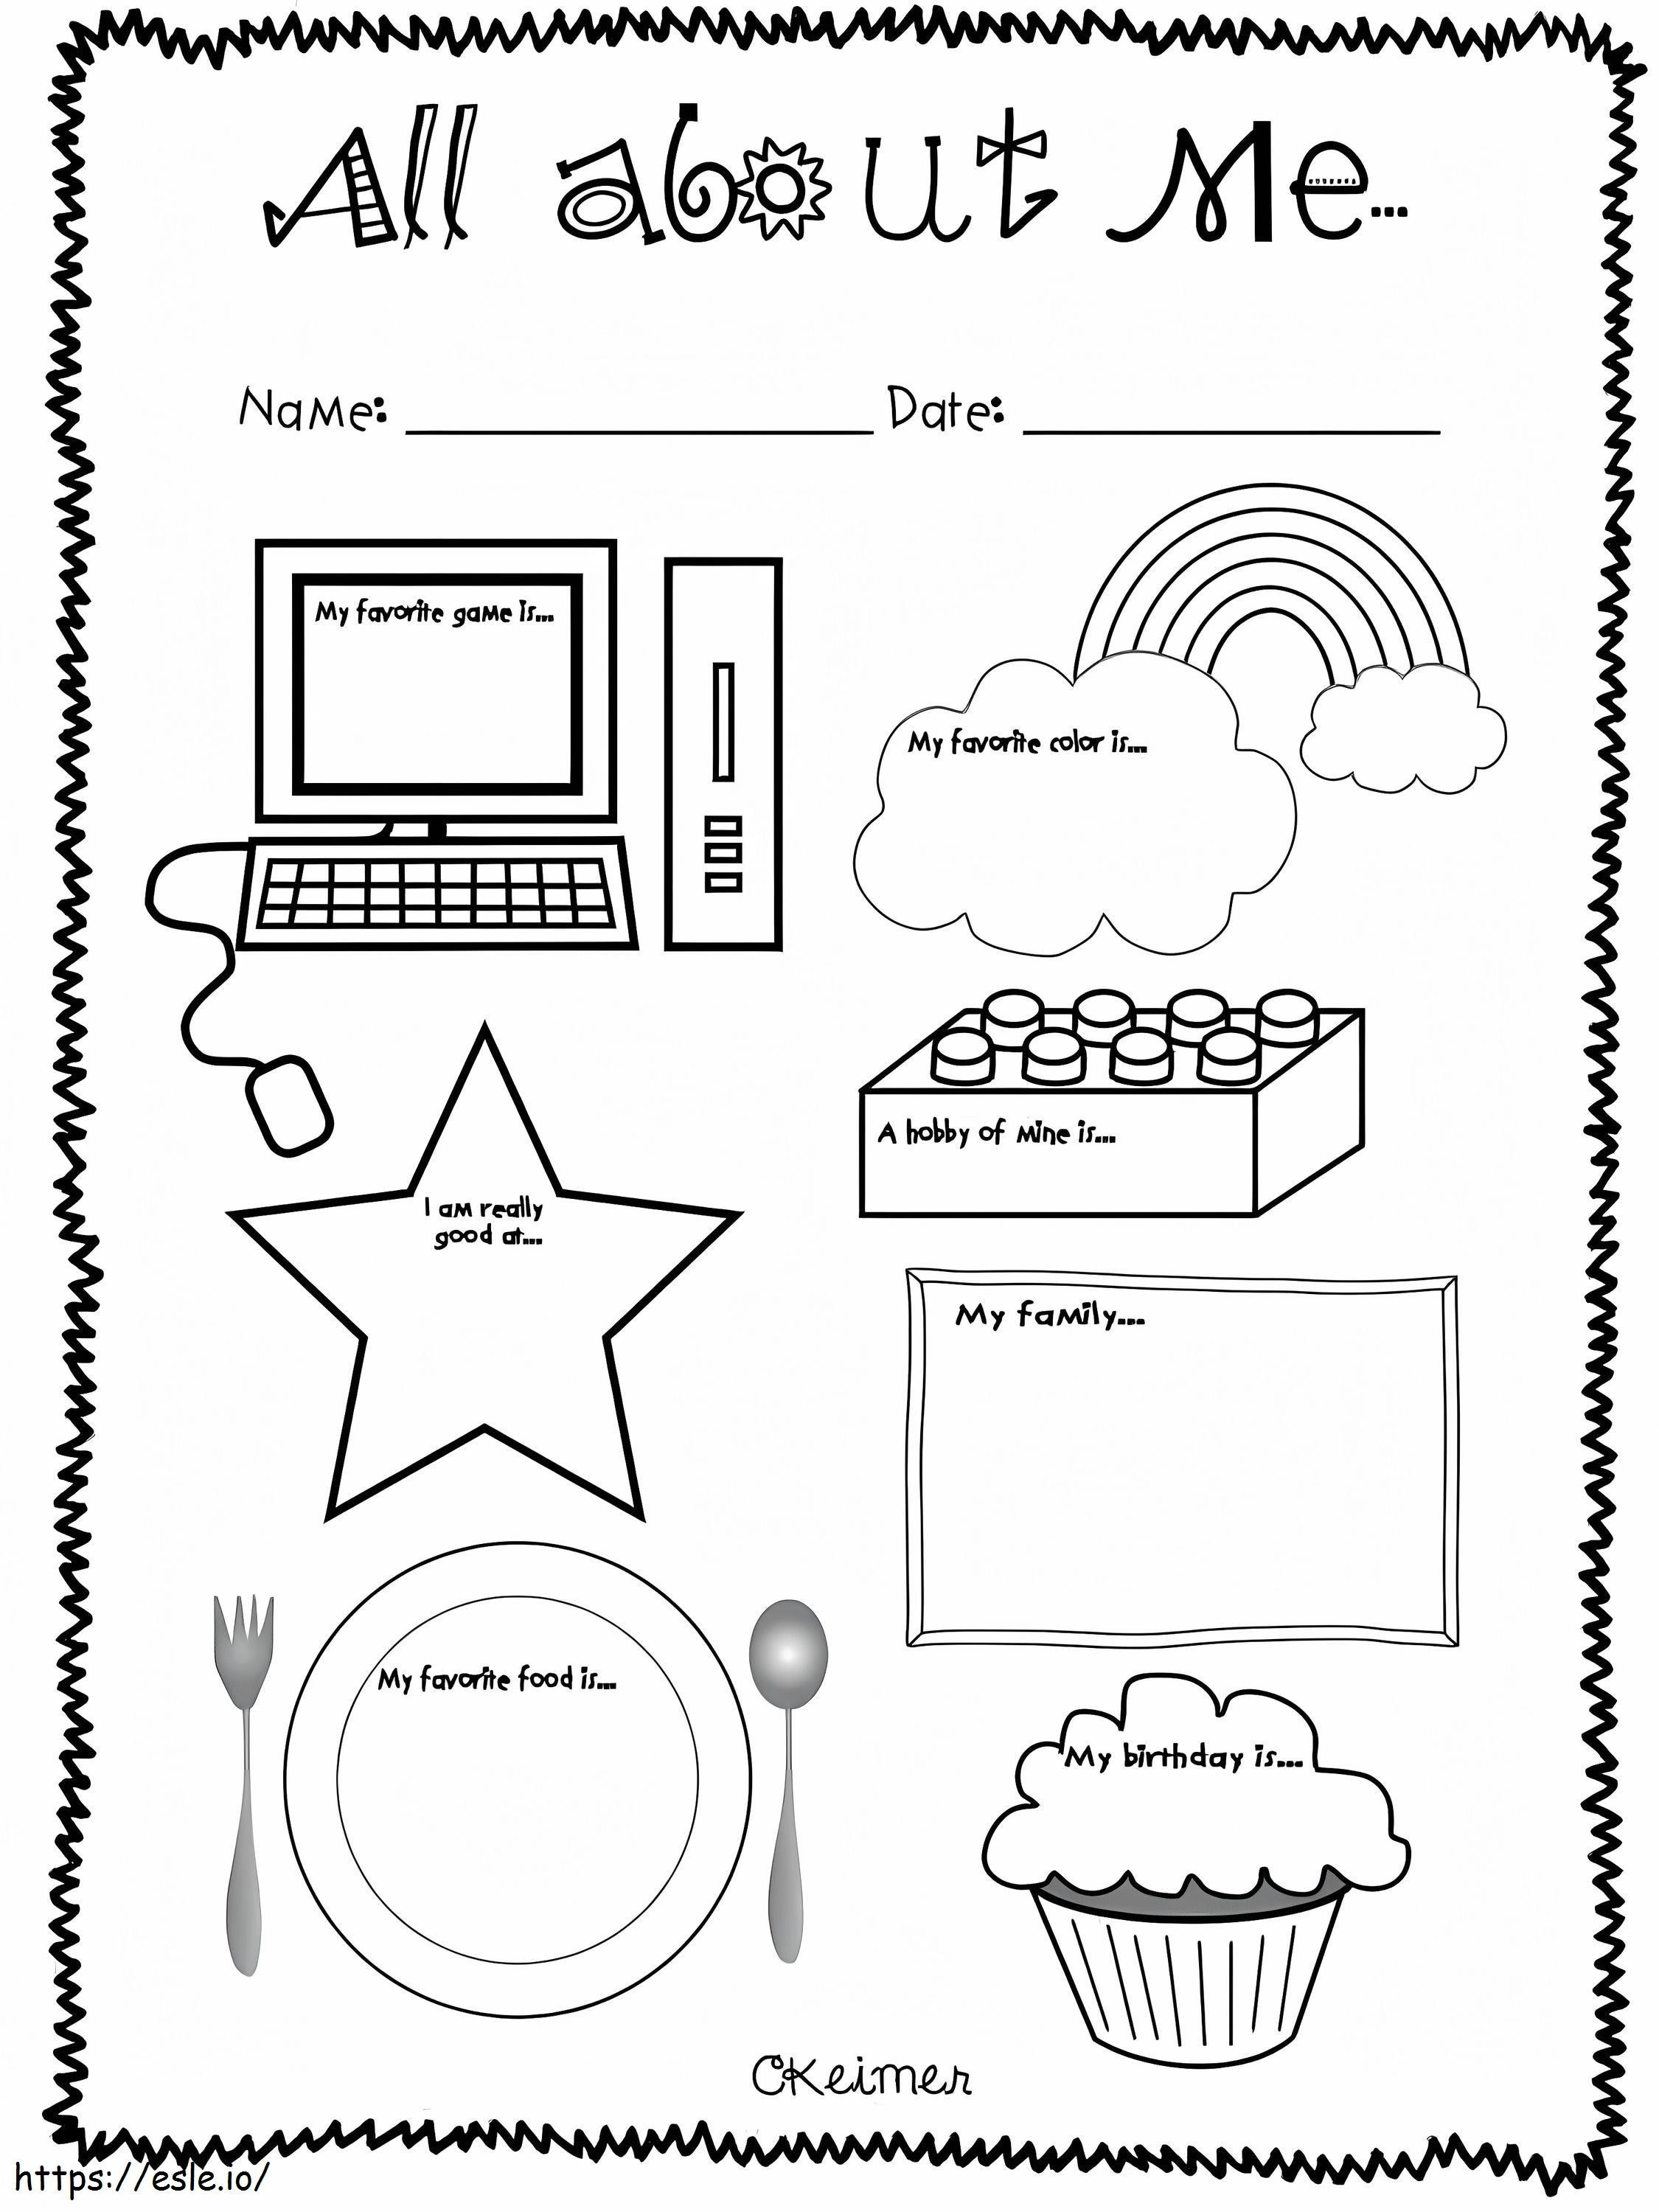 All About Me 8 coloring page